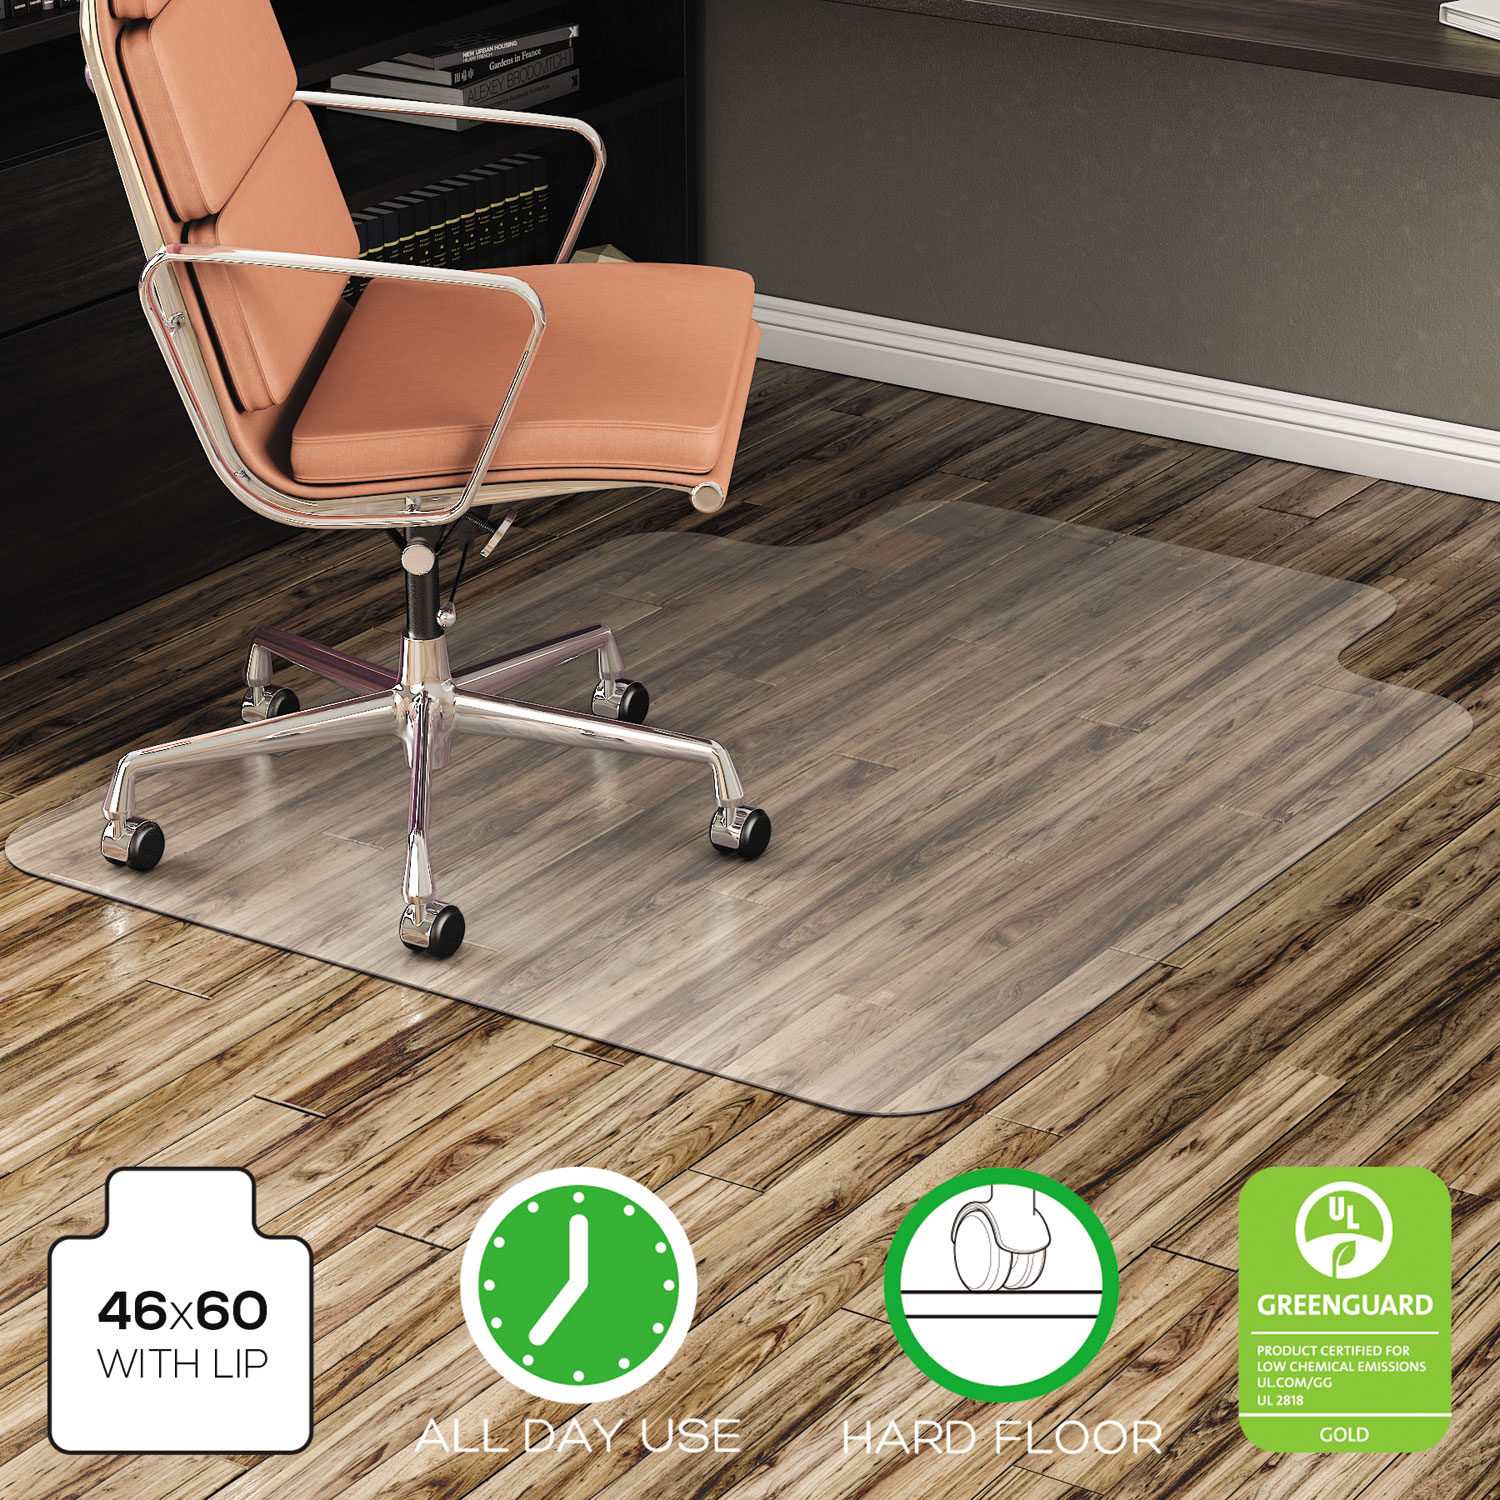 EconoMat All Day Use Chair Mat for Hard Floors, Lip, 46